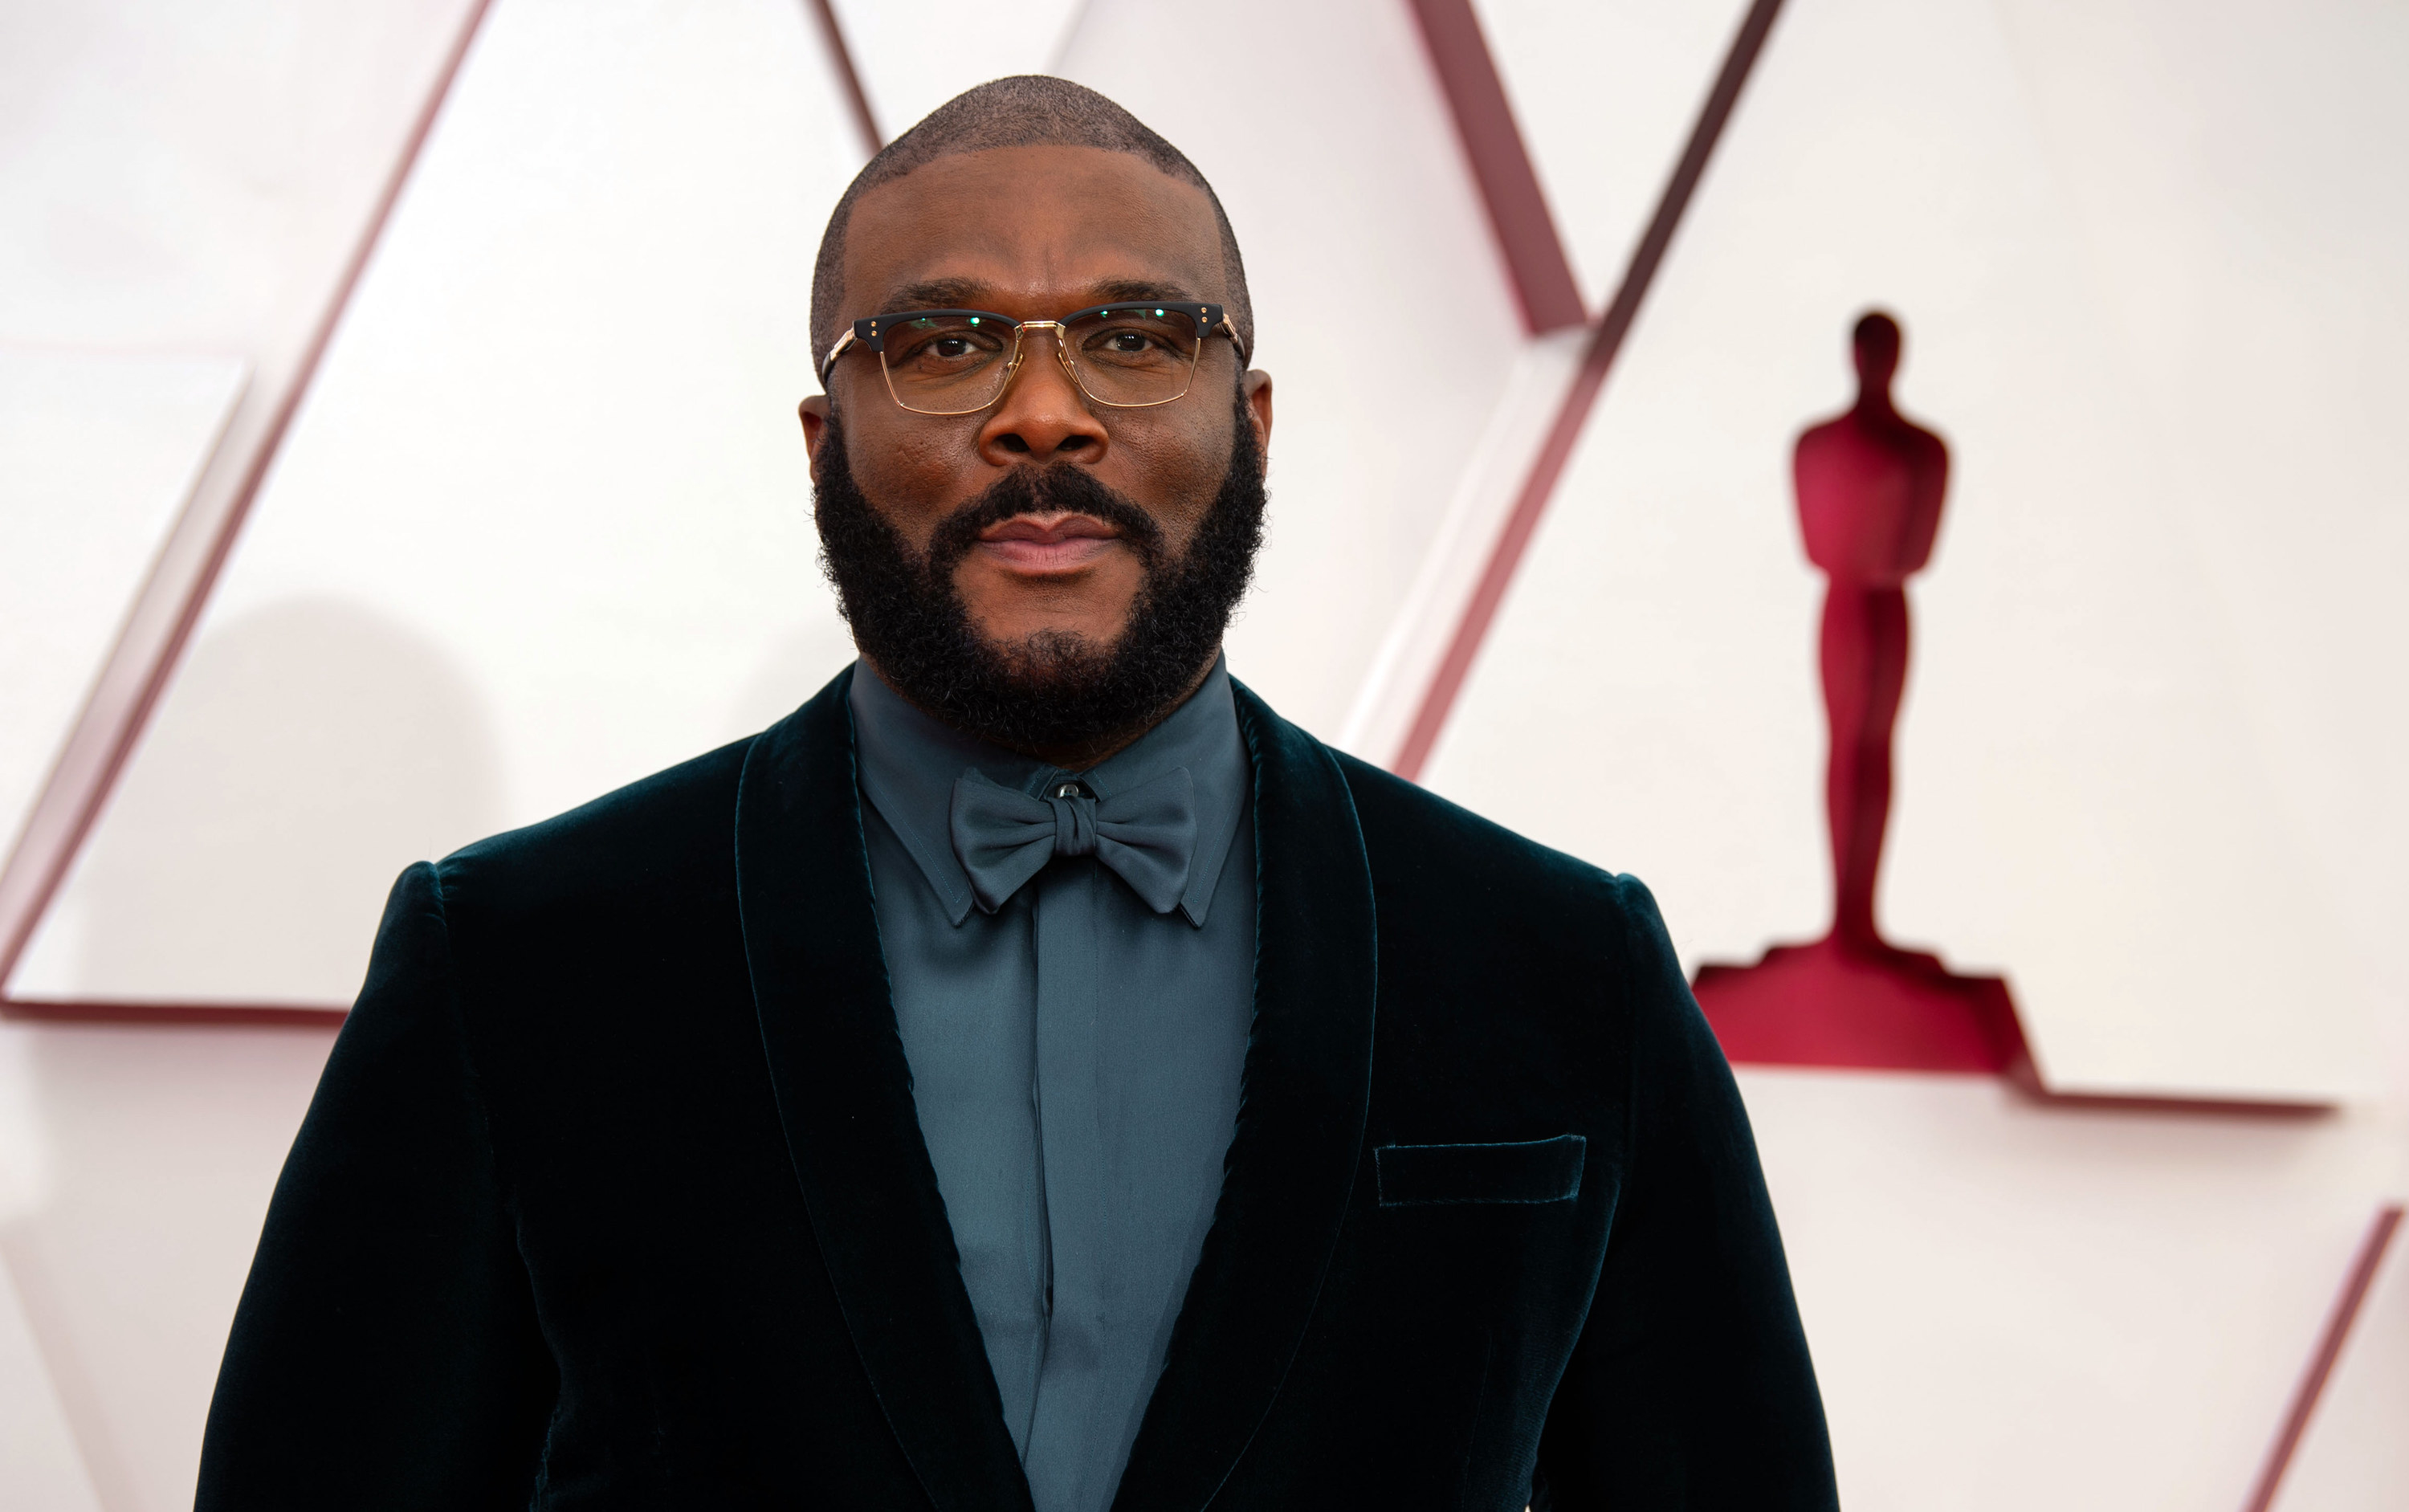 Tyler Perry posing at the Oscars